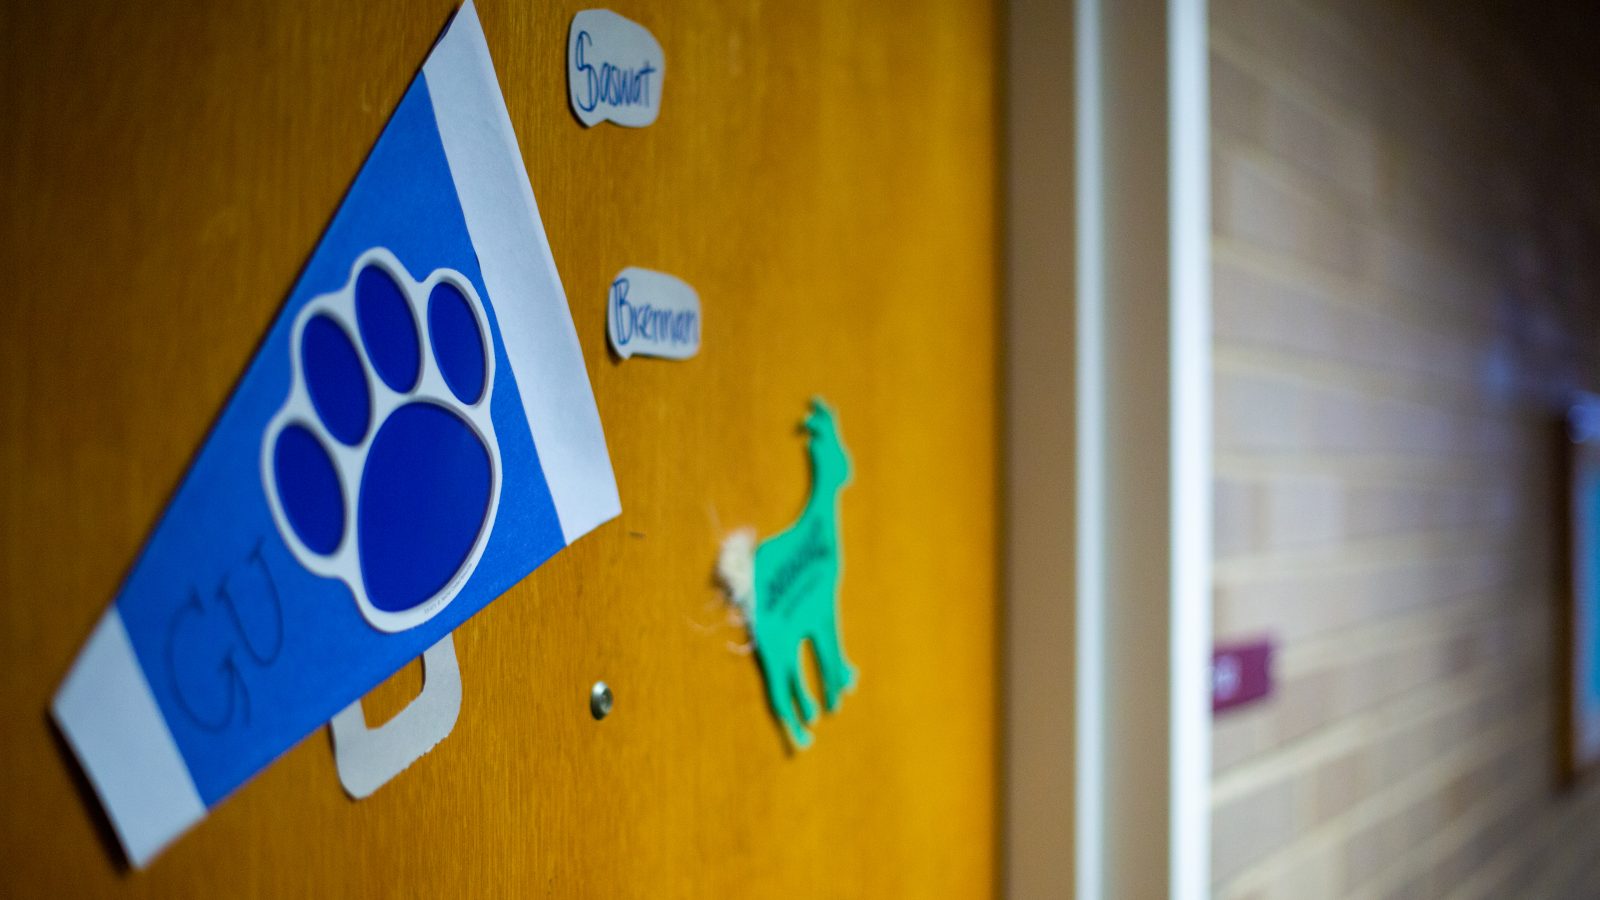 Blue pennant with a paw print on it hangs on dorm door